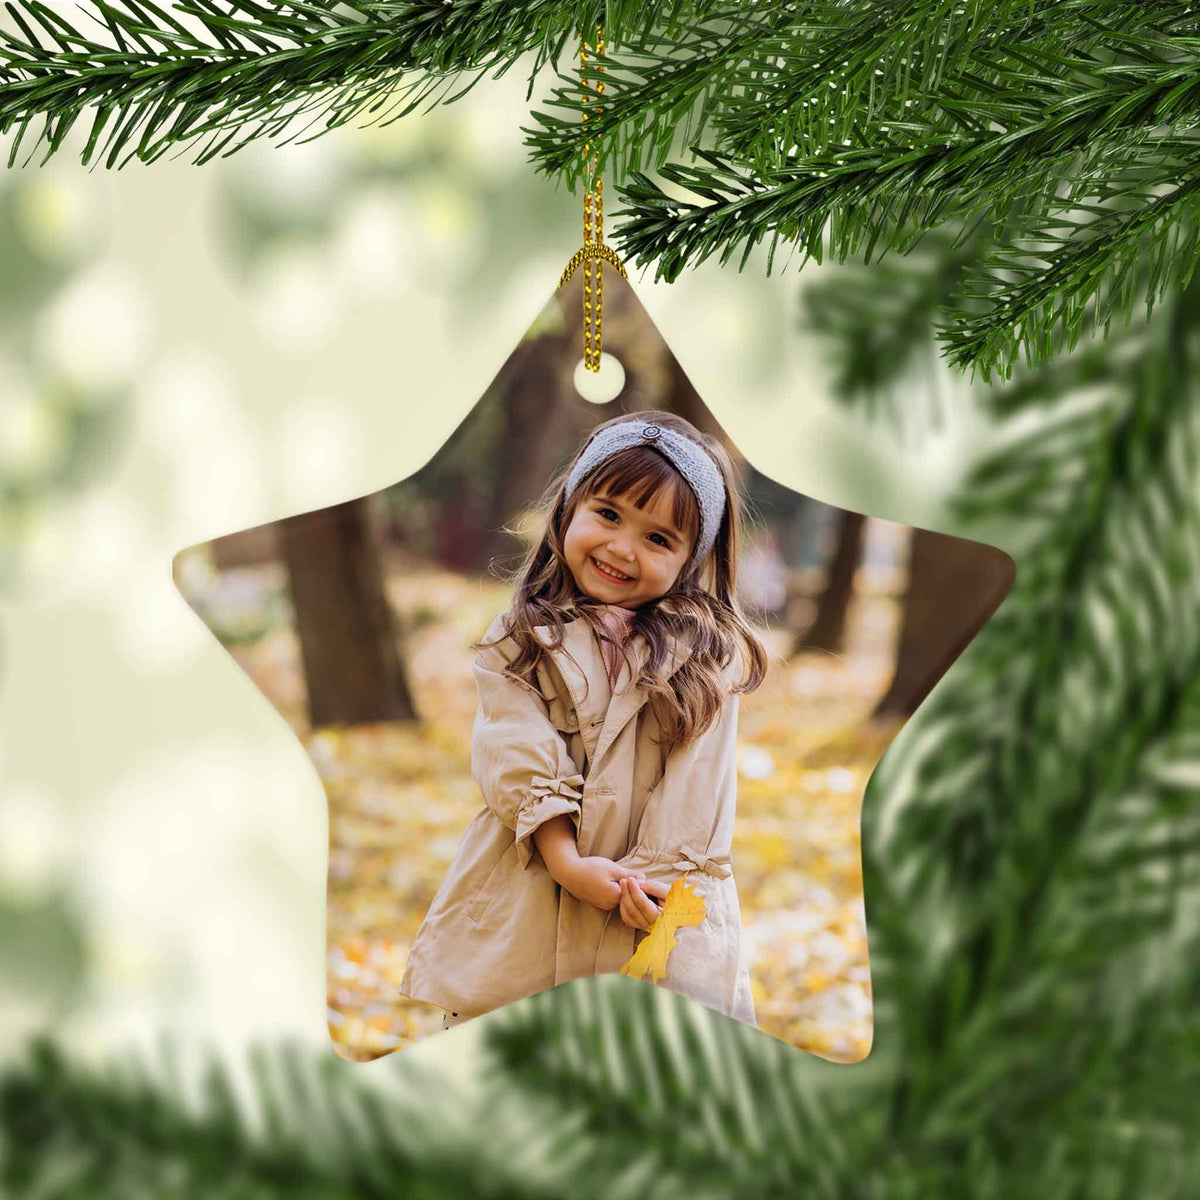 Photo Holiday Ornaments | Personalized Christmas Ornaments | Custom Photo Round